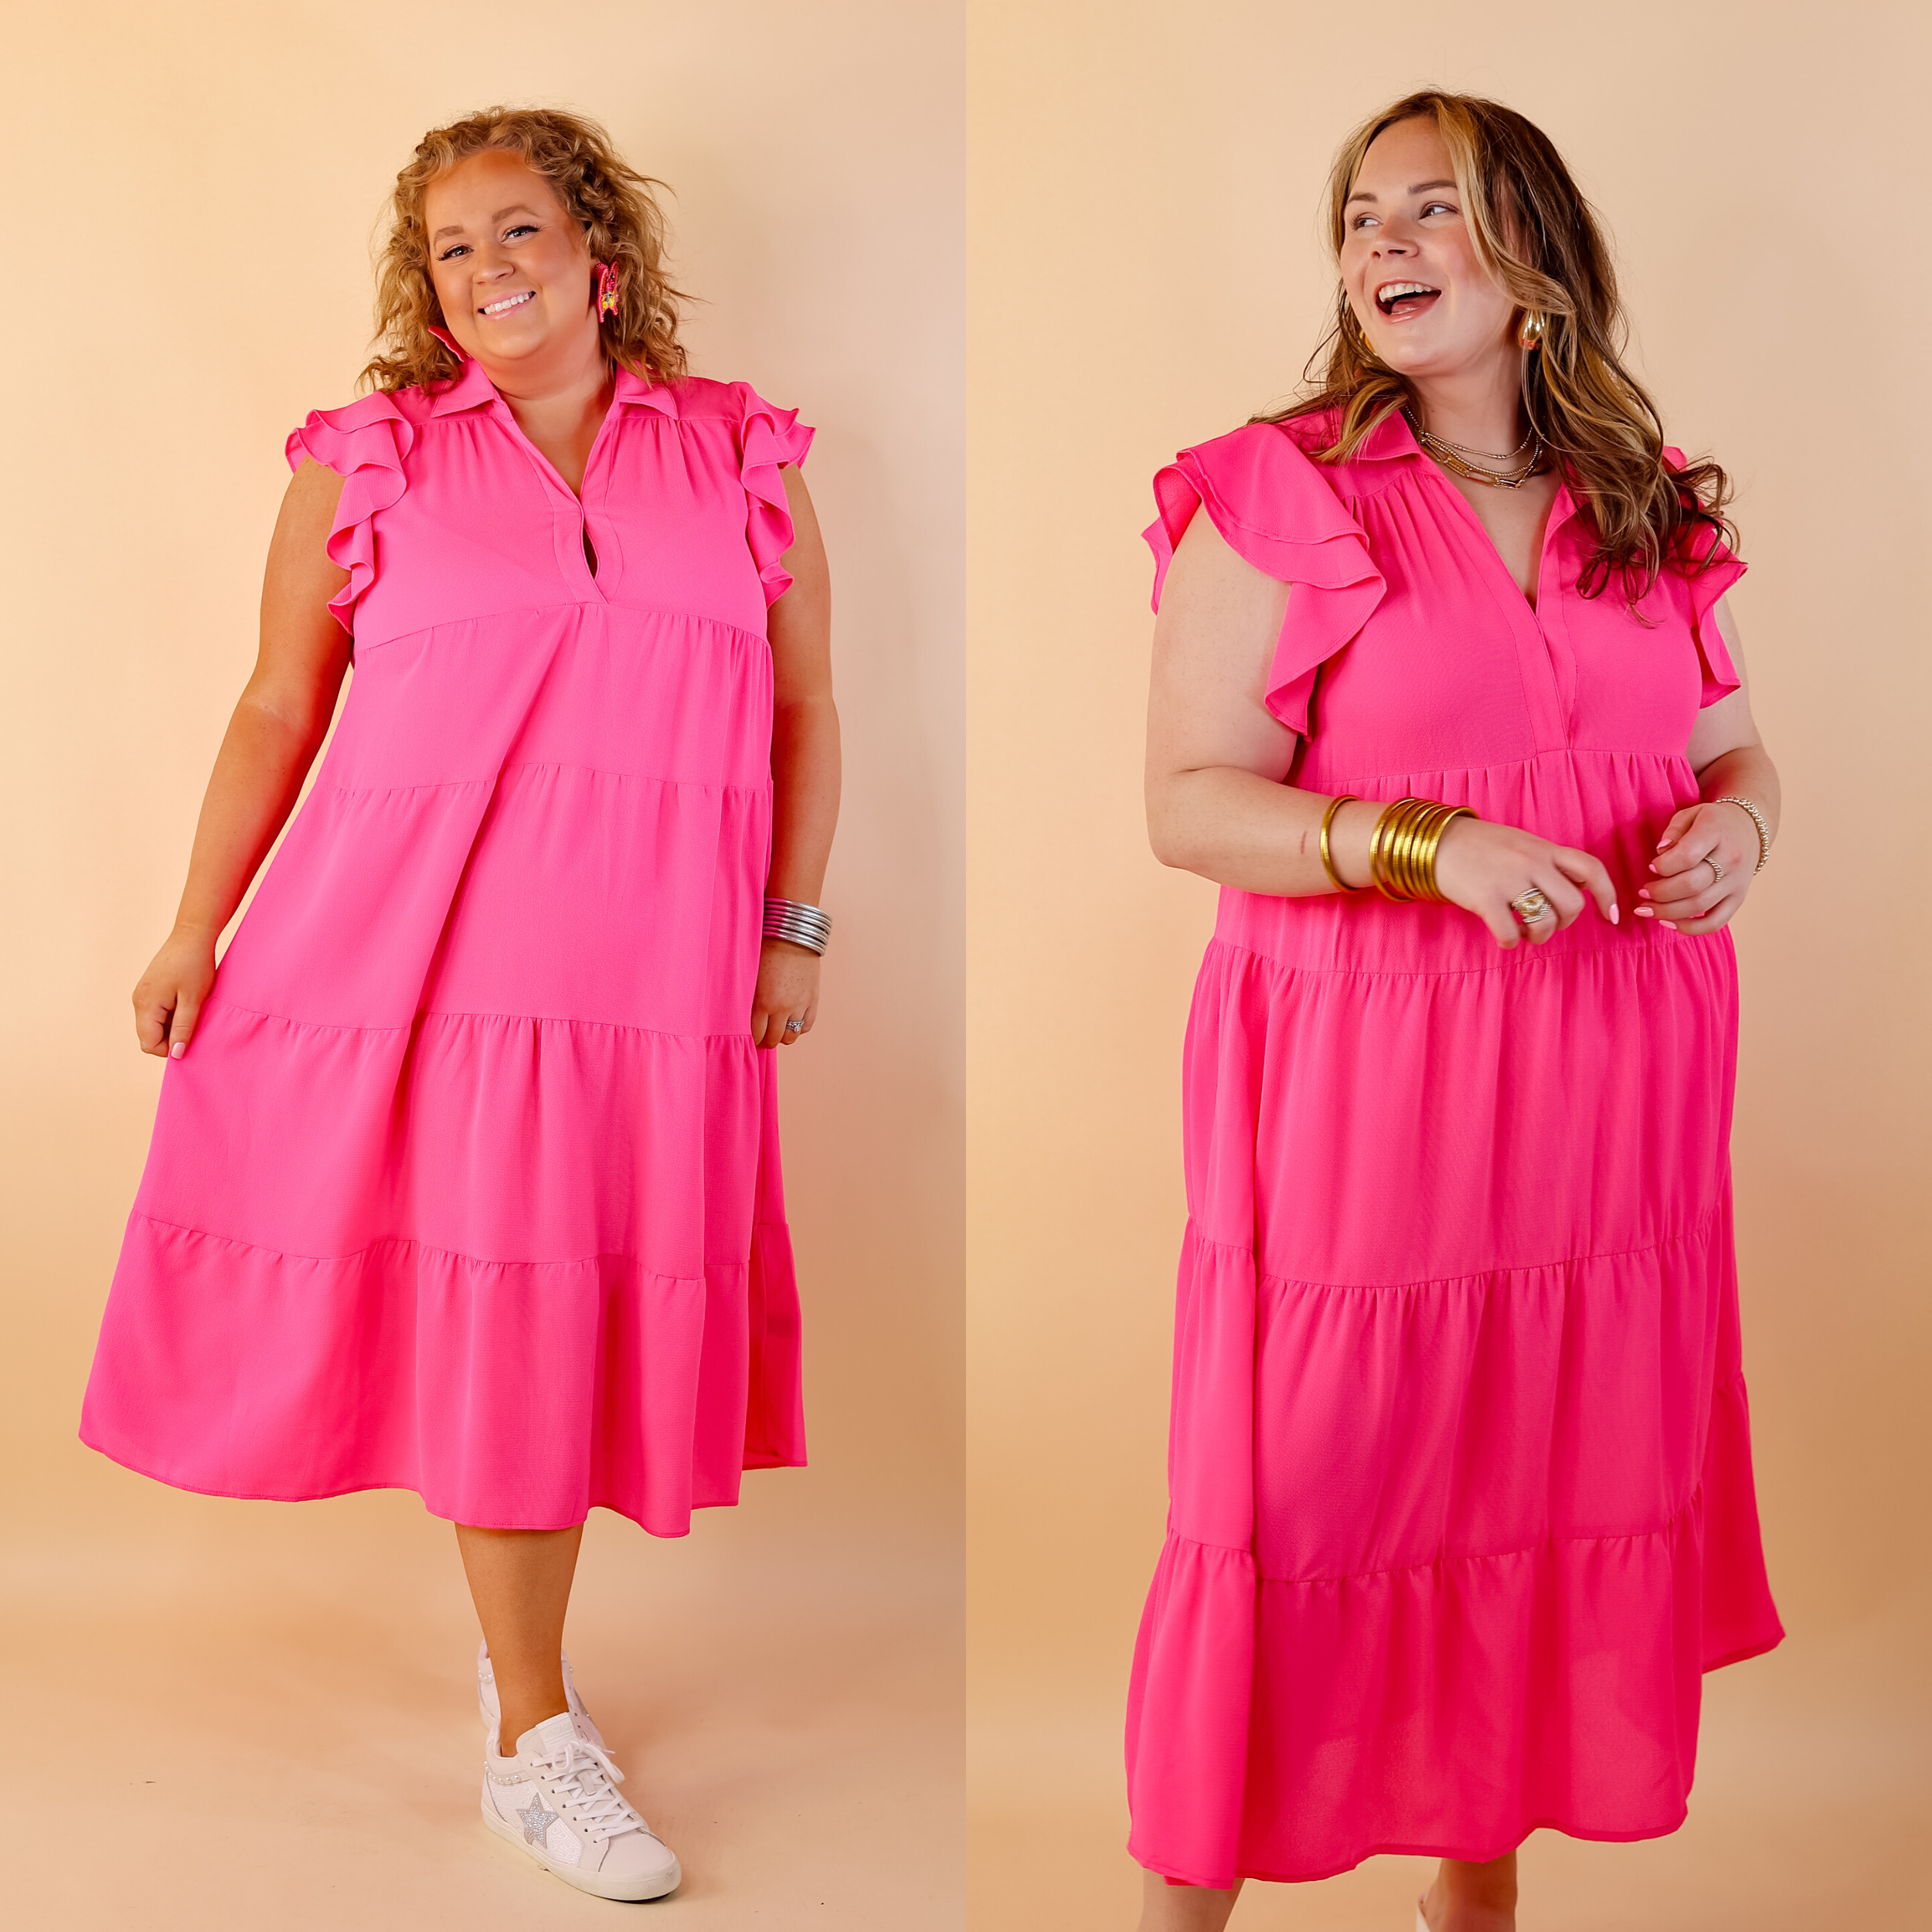 All Of A Sudden Tiered Midi Dress with Ruffle Cap Sleeves in Hot Pink - Giddy Up Glamour Boutique